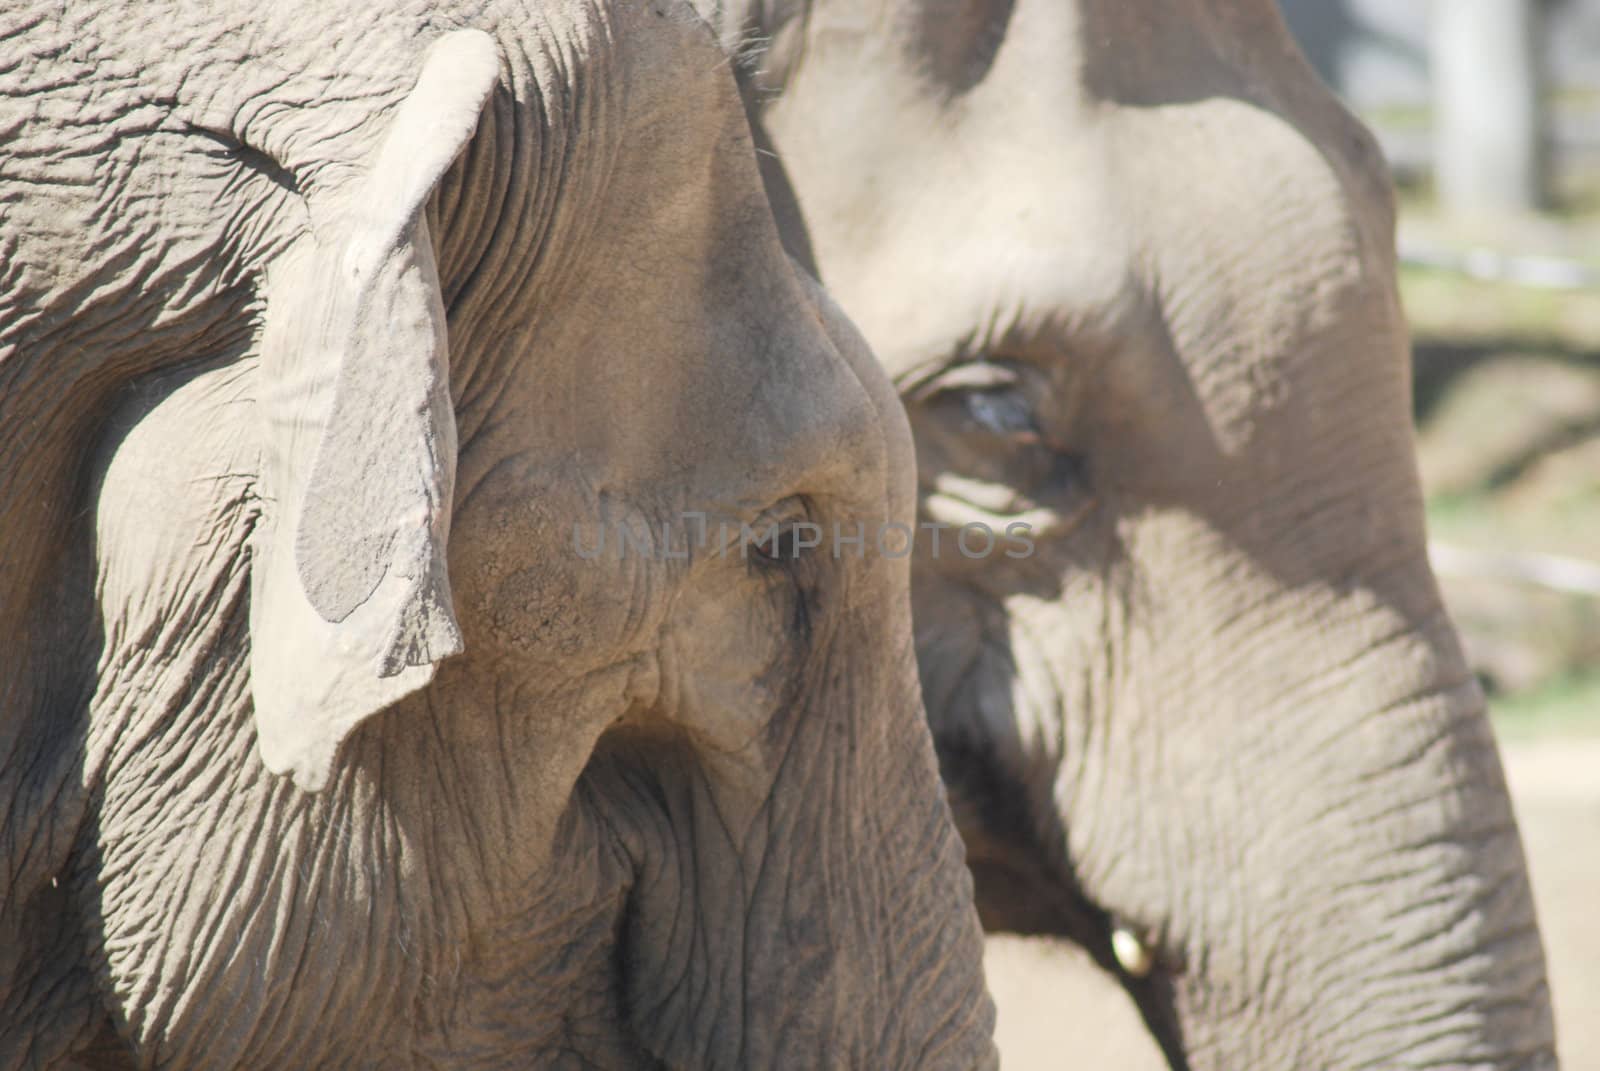  couple of asian elephants in love close up, animal family pair  by svtrotof